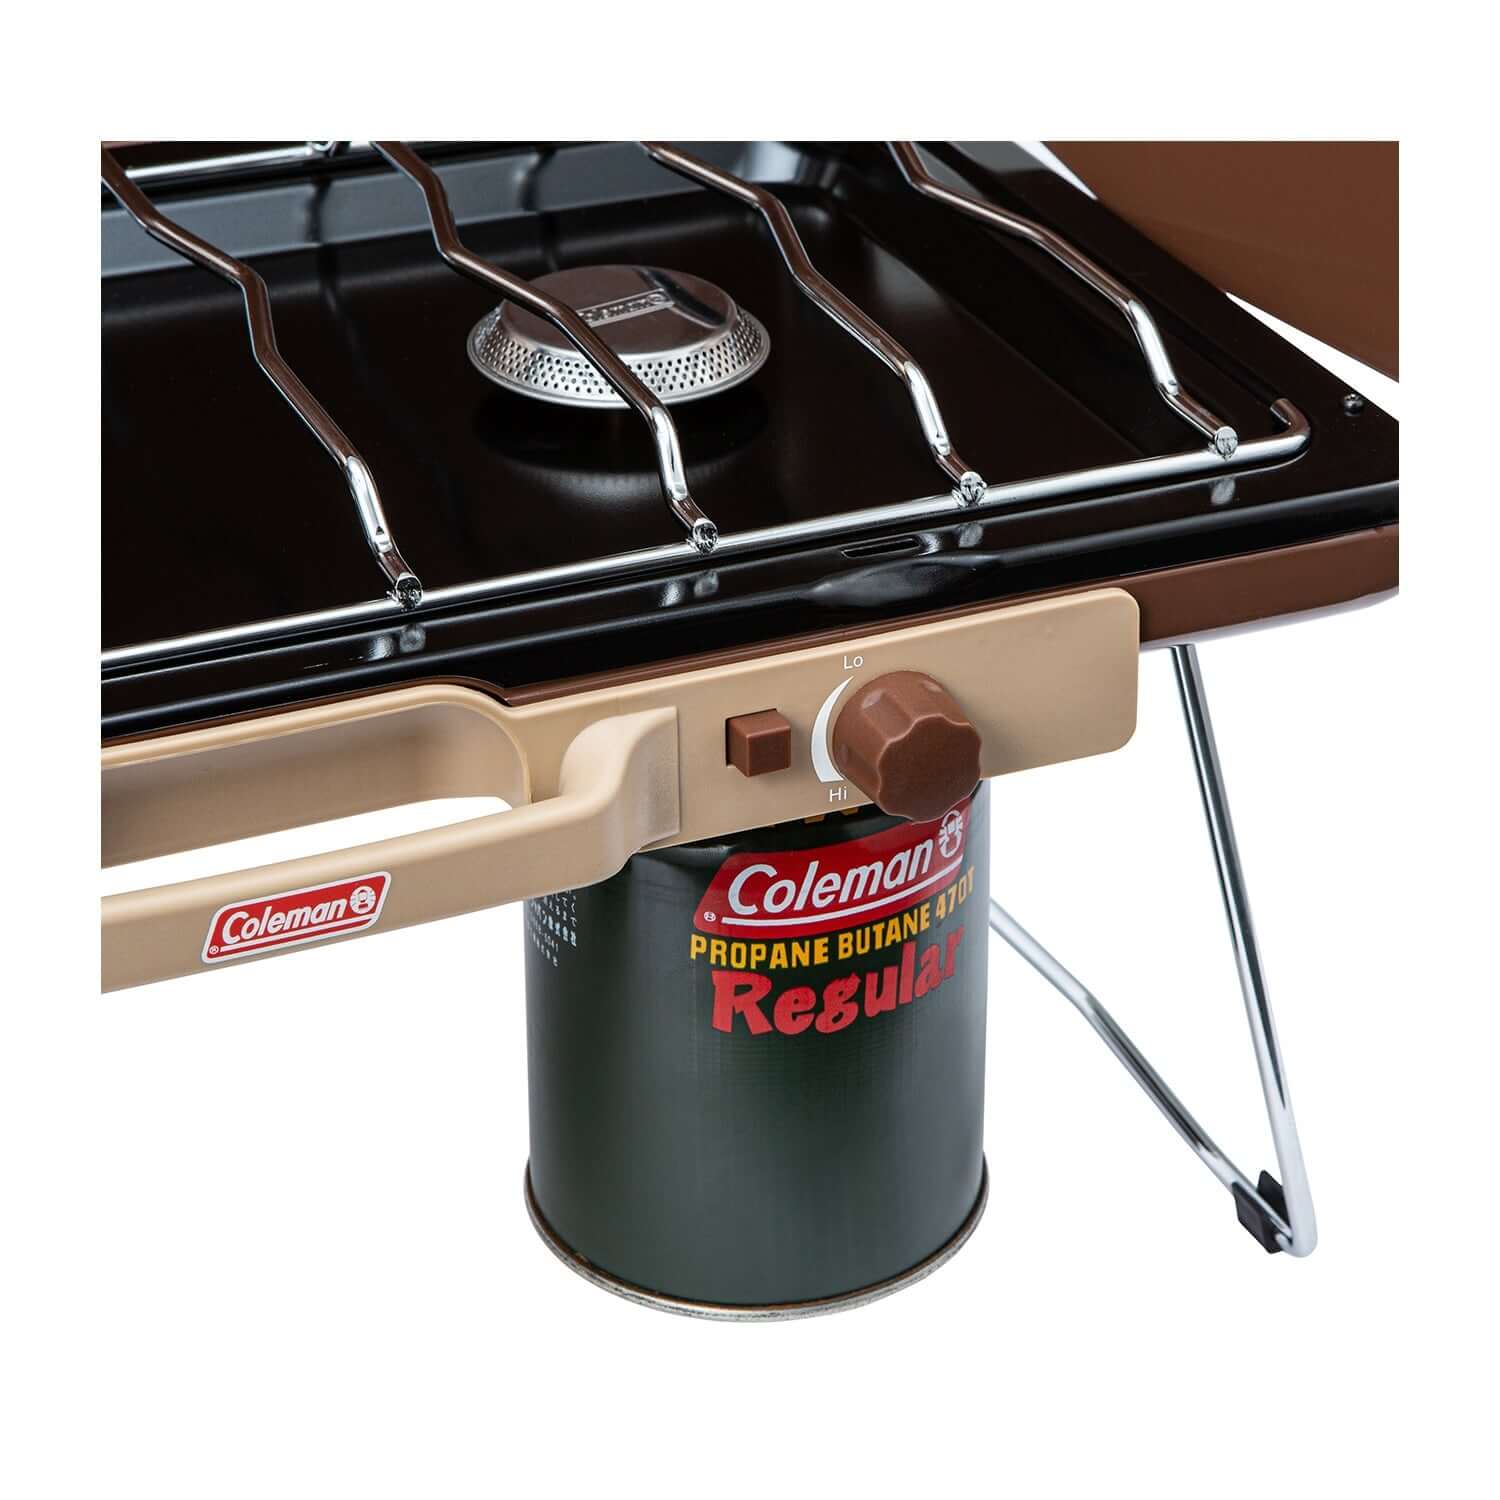 Camping Gas Cooker Duo - Portable Gas Stove - 2-burner Stove - Outdoor Stove  - Butane Gas 